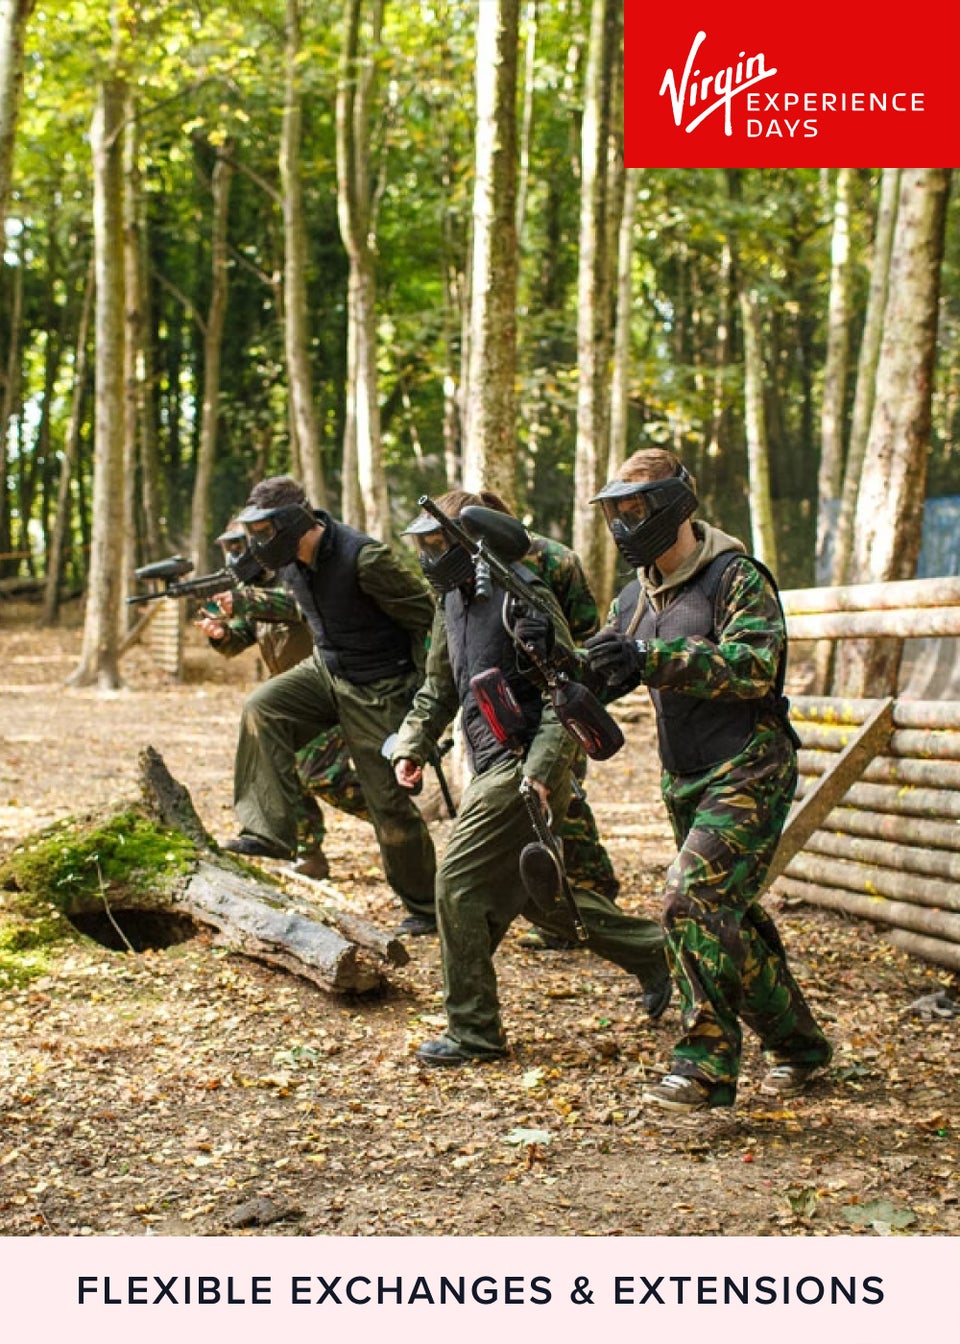 Virgin Experience Days Full Day Paintballing for Two